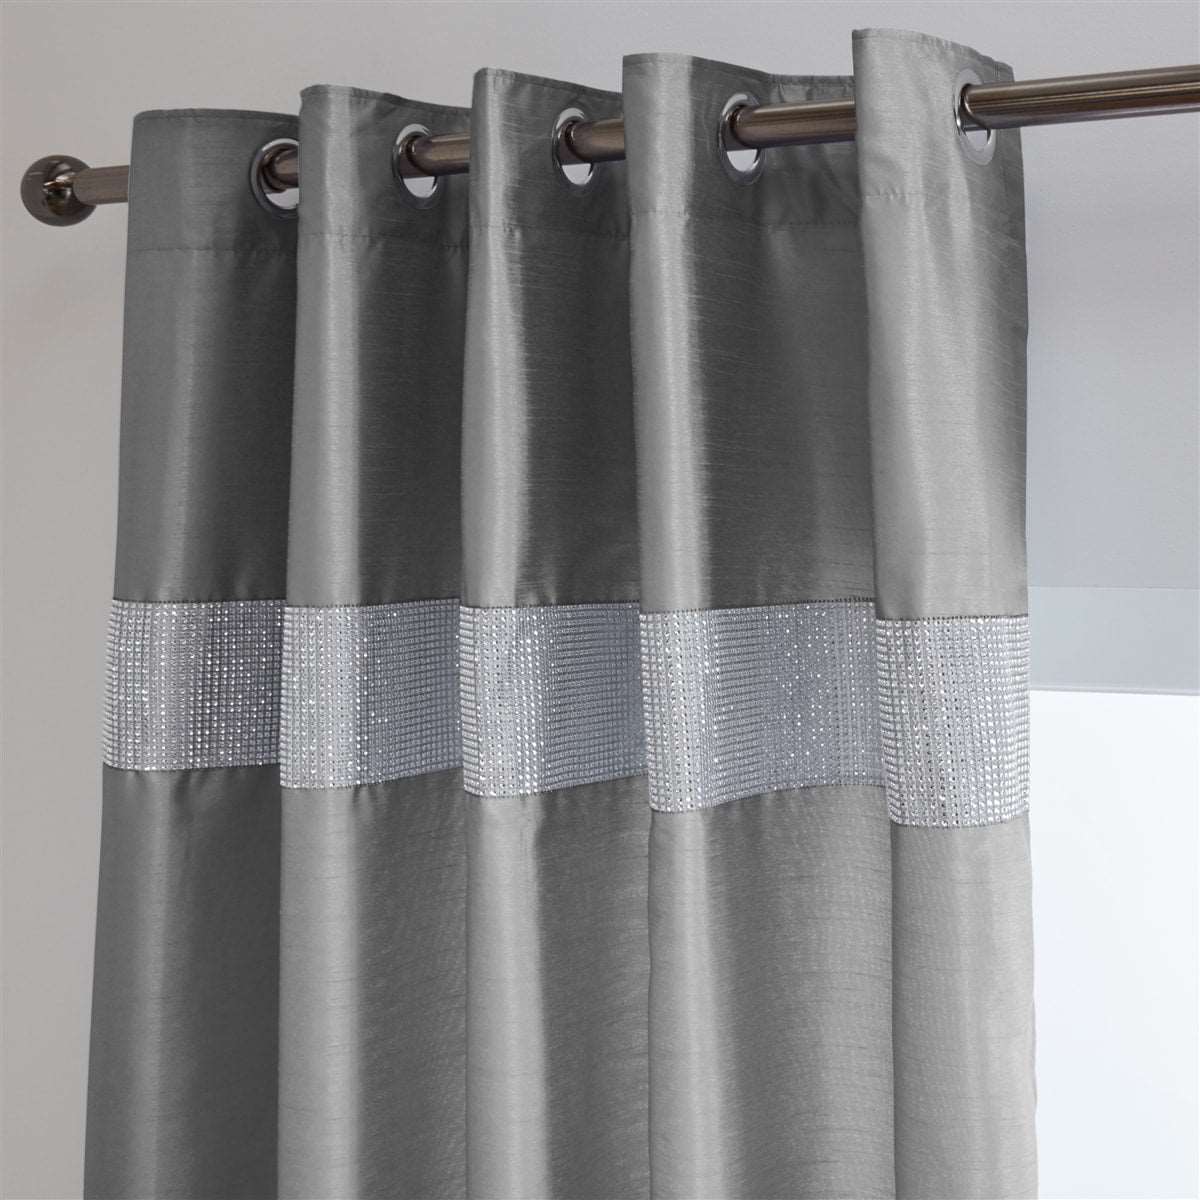 Diamante' Fully Lined Grey Faux Silk Ready Made Eyelet Curtains